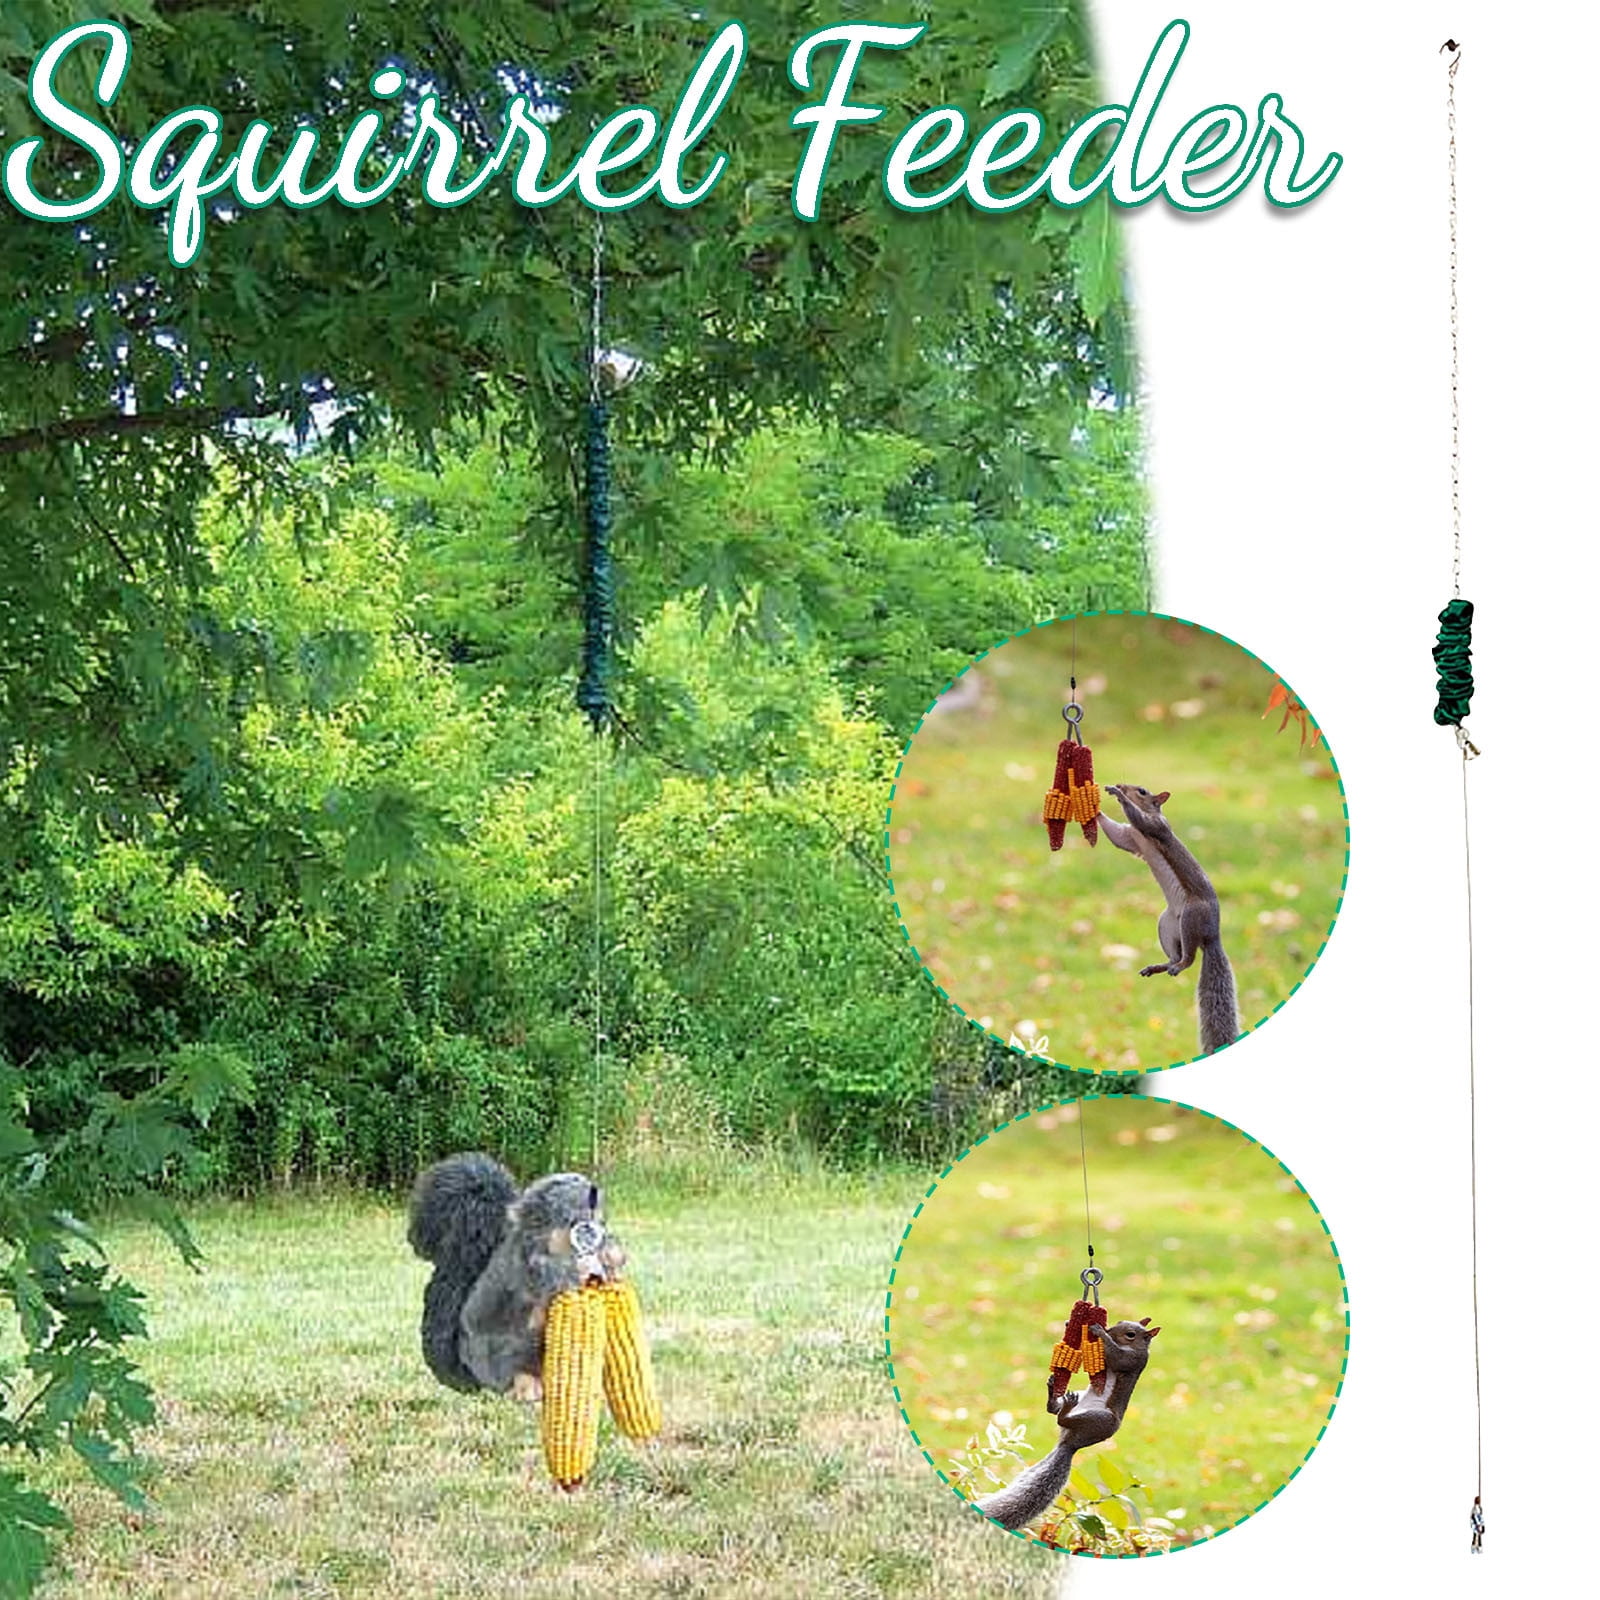 Squirrel Bungee Jumping Fun Feeder Attracts Squirrel Backyard Wildlife Bungee Jumping Spring Feeder Green Corn Cob Holder Squirrel Feeder for Outside Courtyards Garden Squirrel Bungee Feeder 